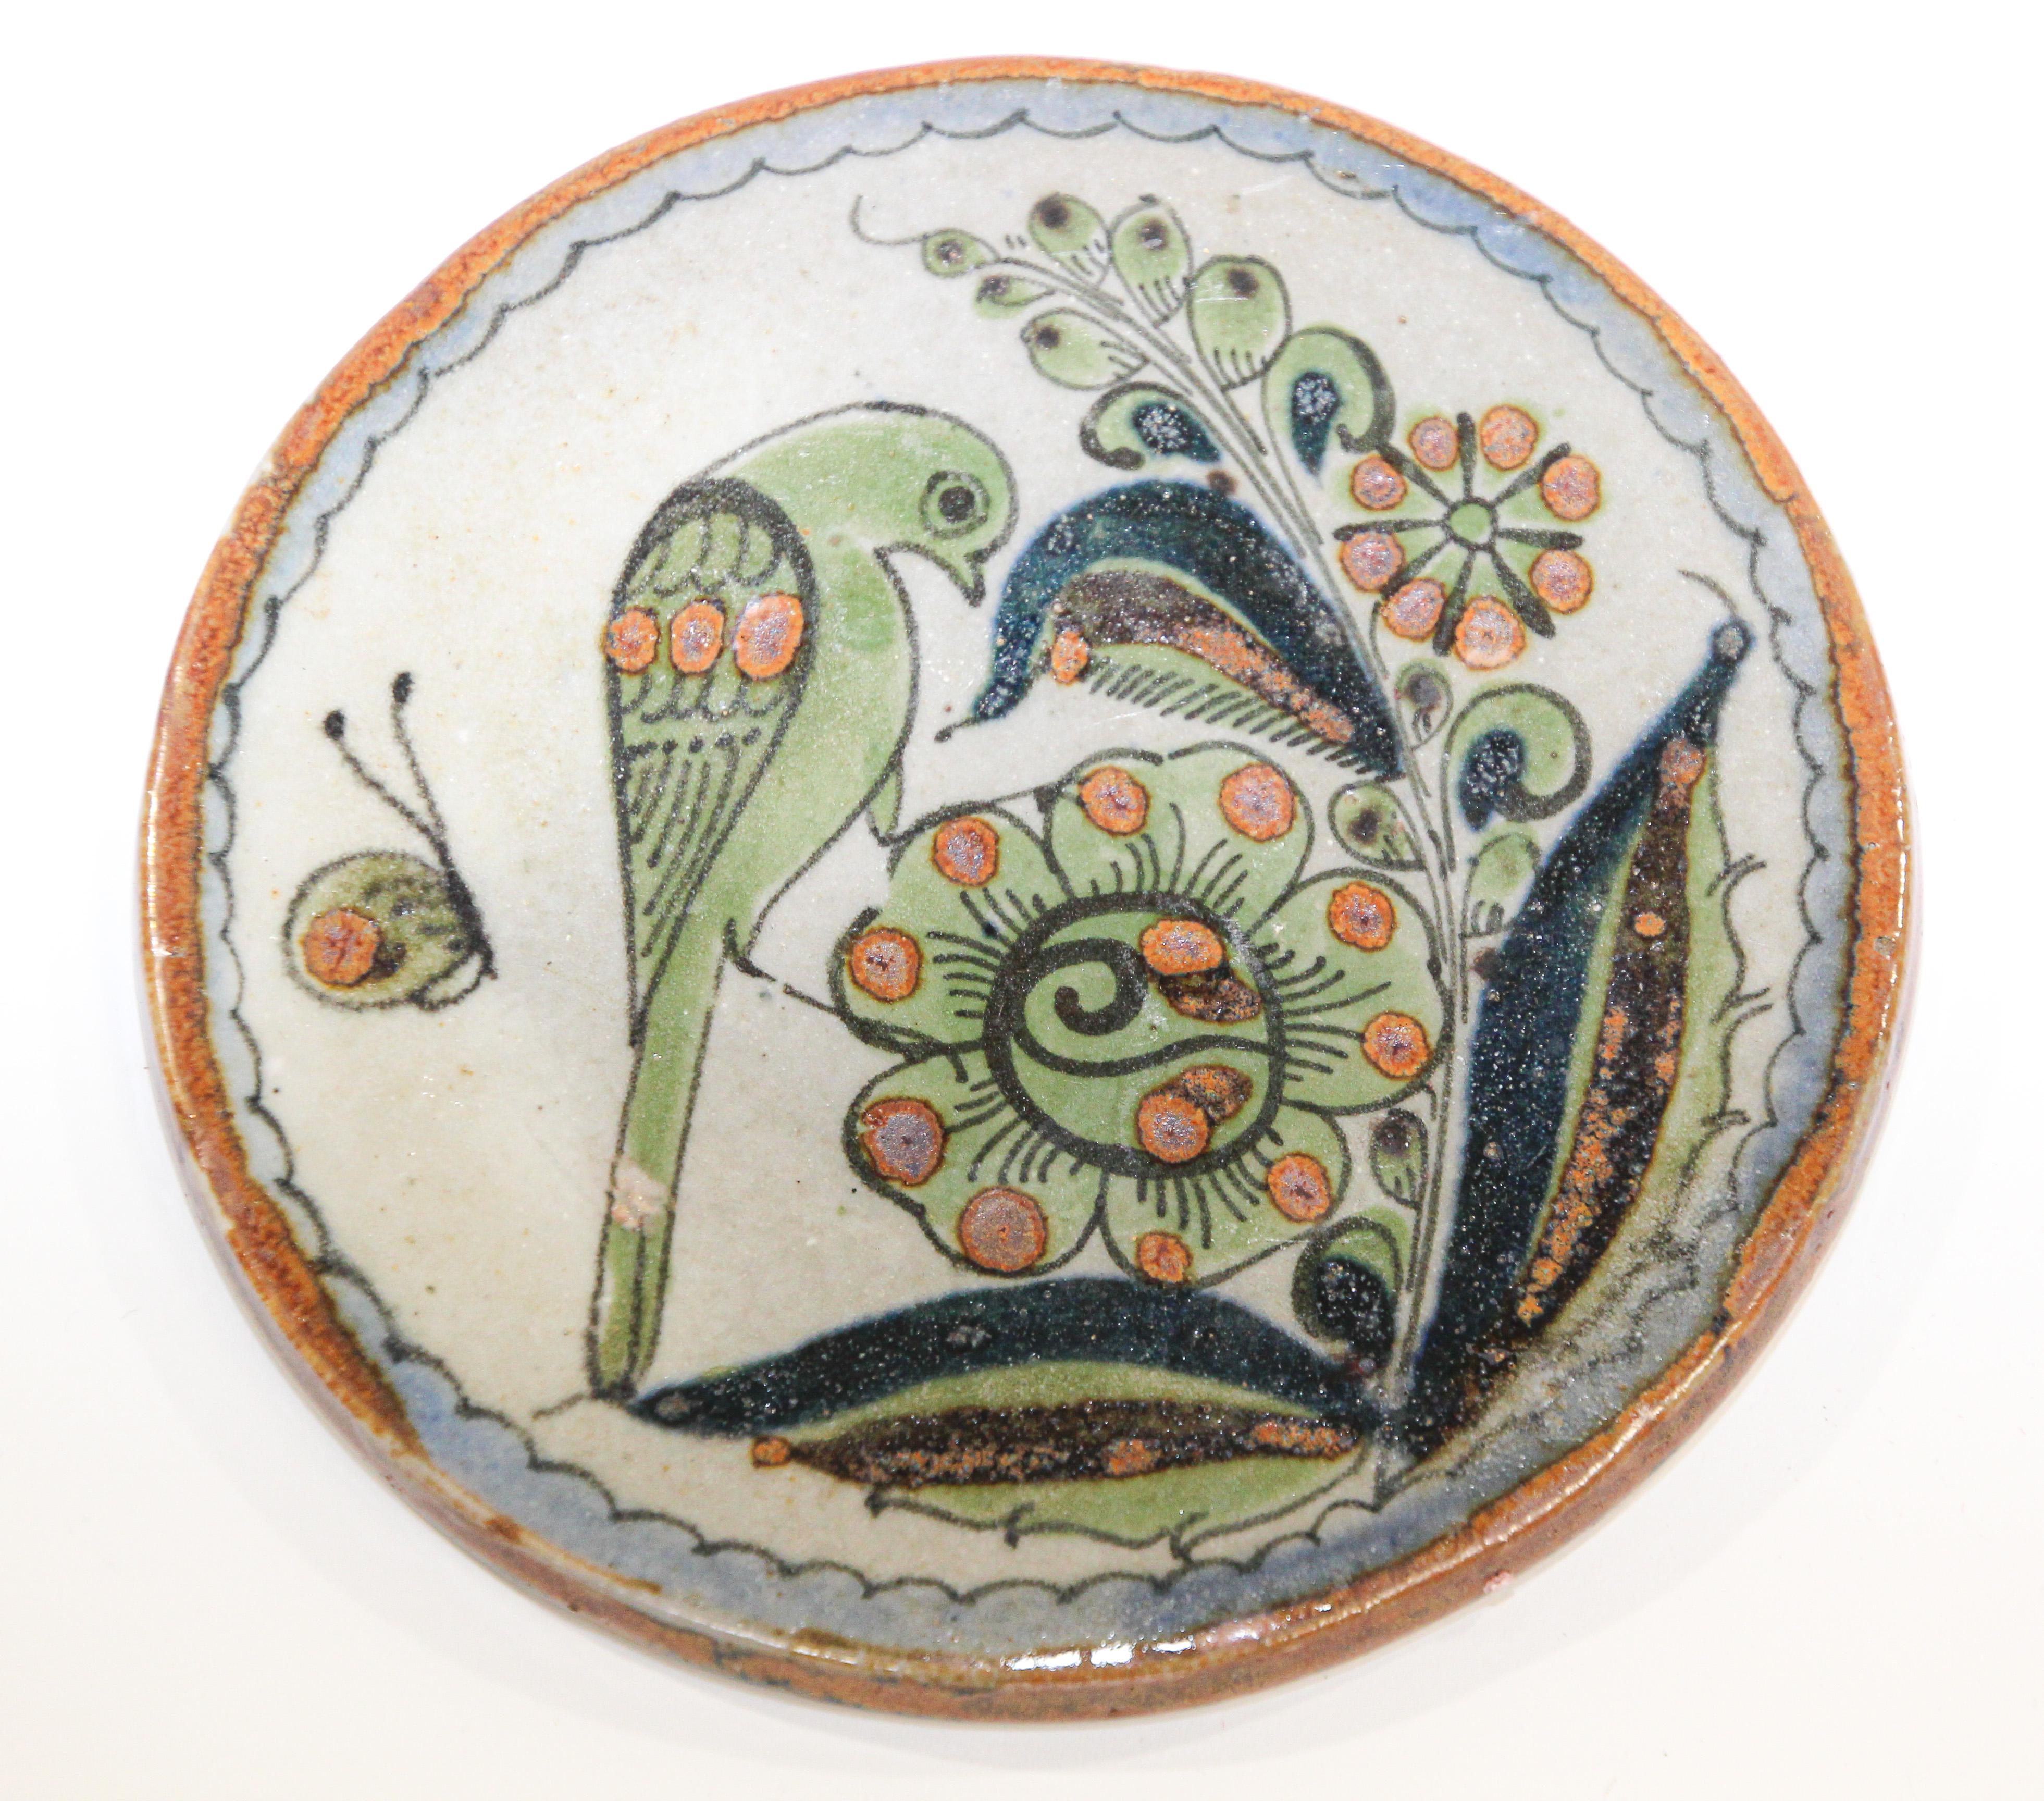 Vintage Ken Edwards Mexican ceramic bird trivet from Tonala Pottery.
Beautiful vintage Mexican hand made and hand painted TONALA Art Pottery.
Decorative small plate, coaster by Ken Edwards' El Palomar studio with a Cat Face signature.